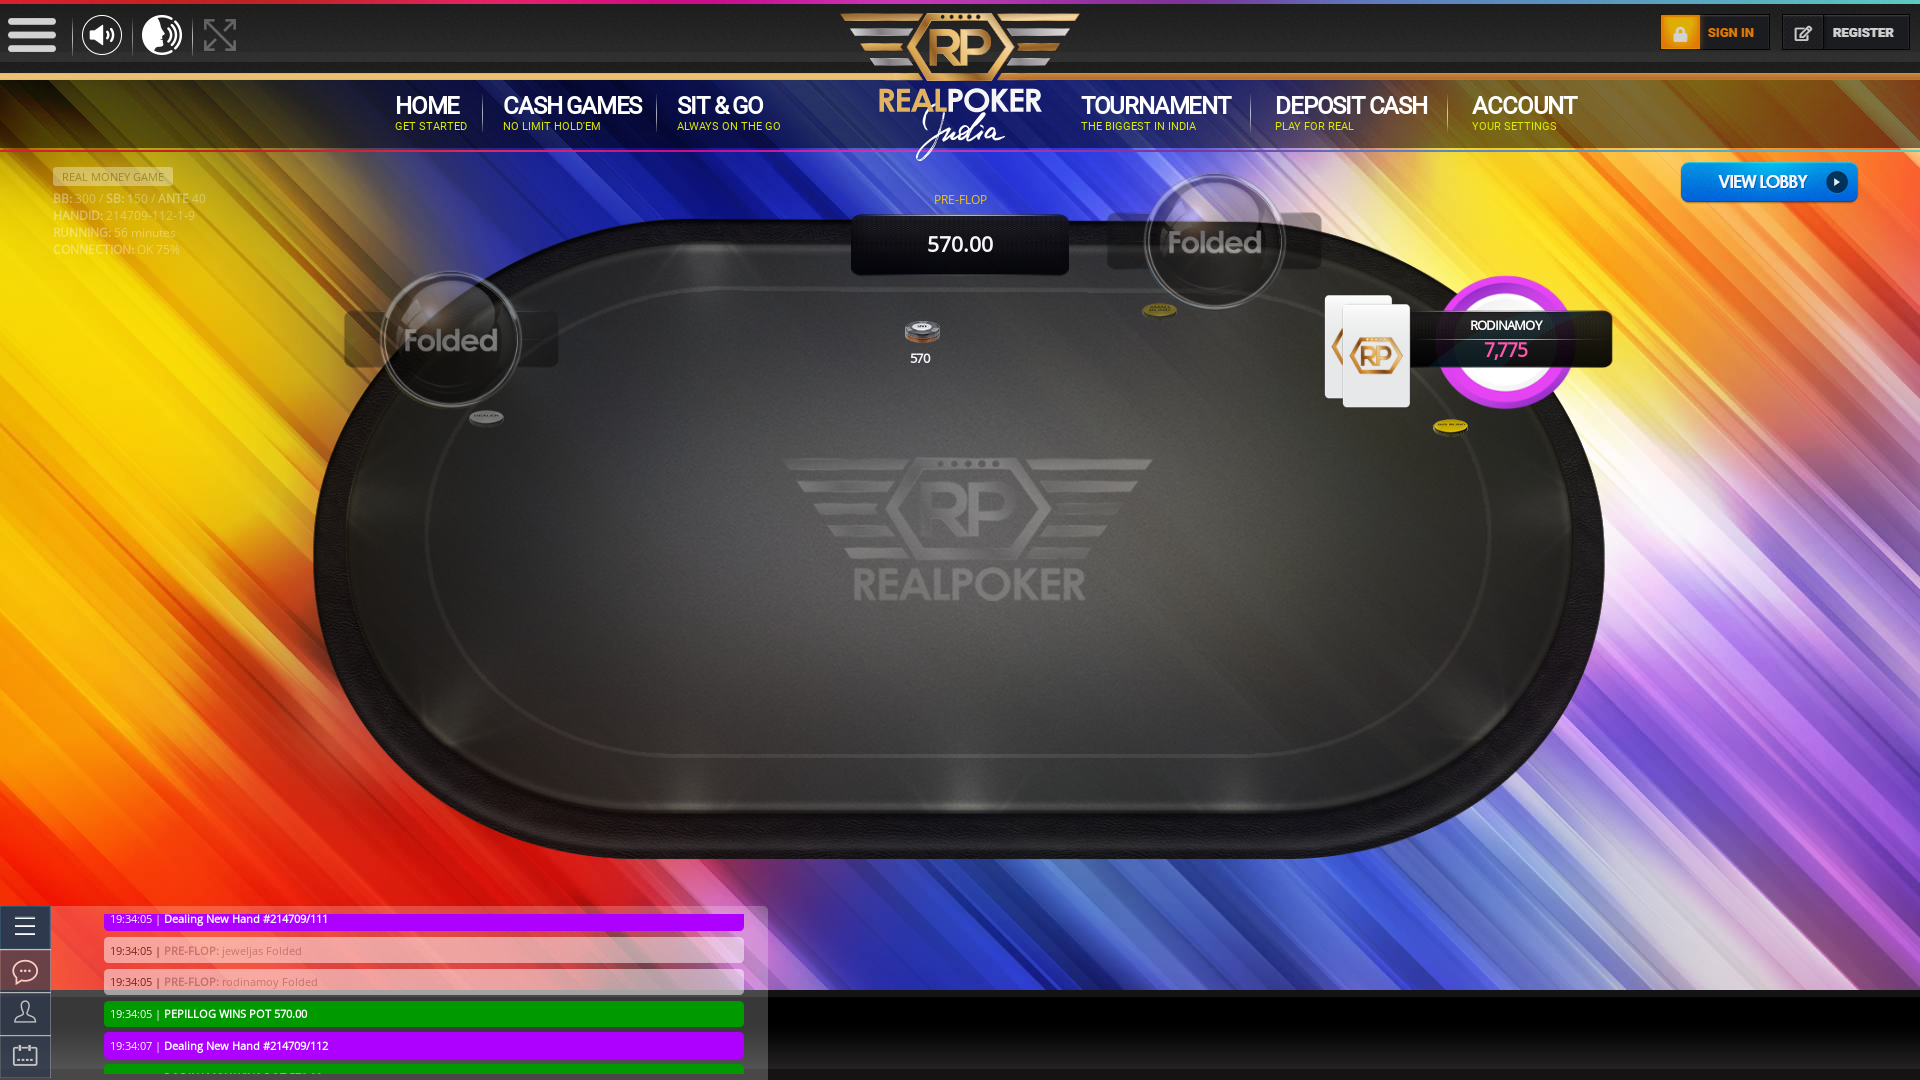 Online poker on a 10 player table in the 56th minute match up